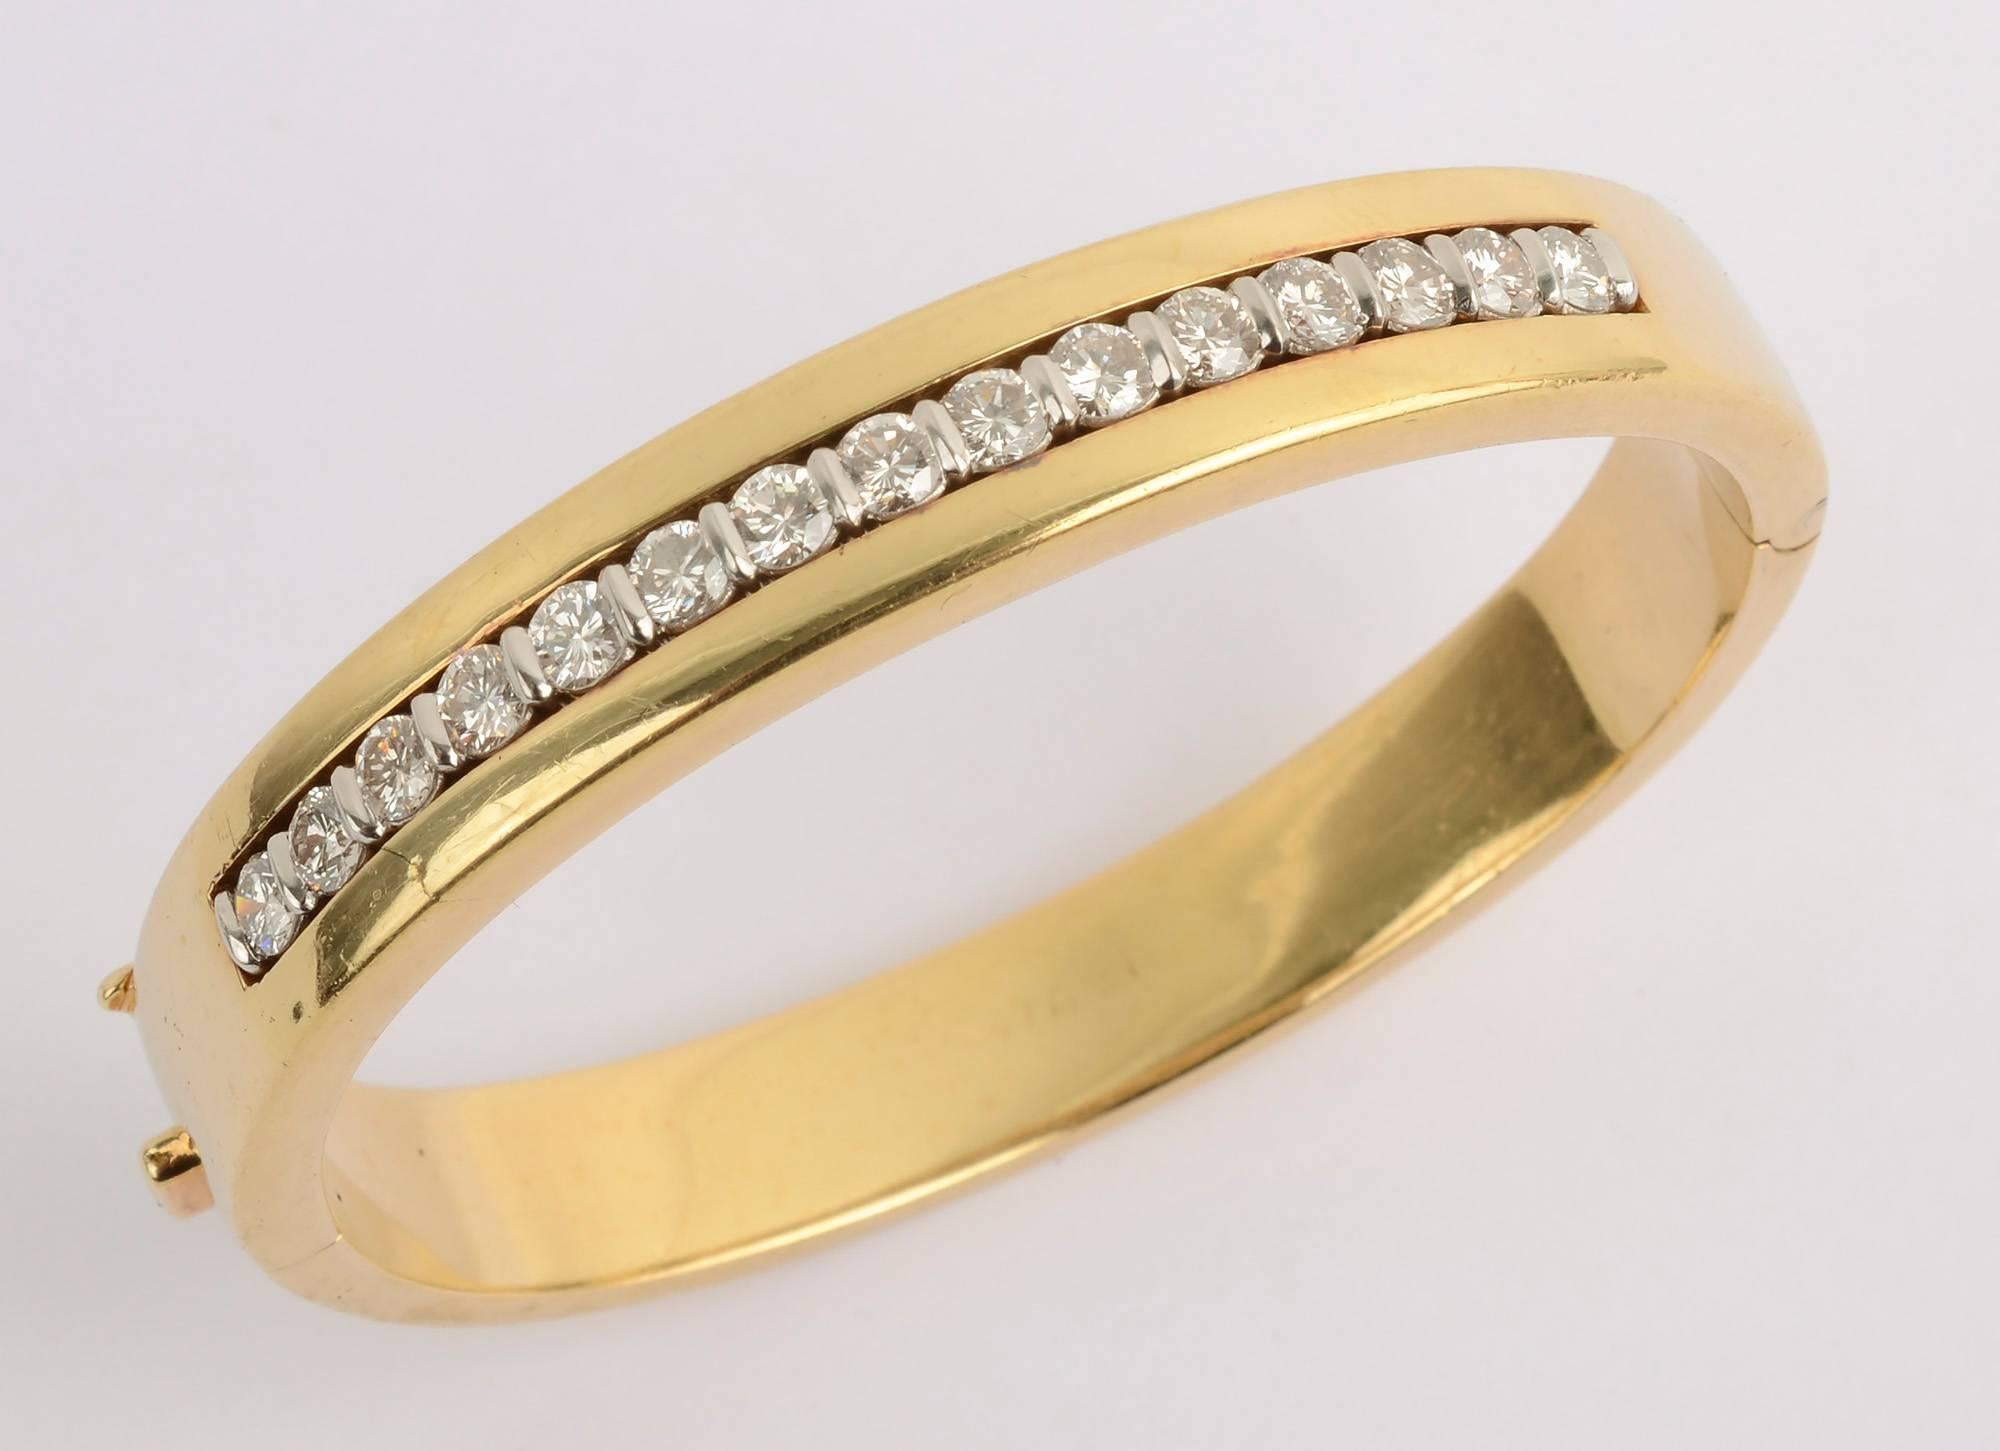 Eighteen karat gold hinged bangle bracelet by Tiffany with diamonds set in platinum. The bracelet has 15 diamonds that weigh a total of 2.25 carats. The bracelet is very secure with a good safety clasp. The interior measures 2 1/8 inches fitting a